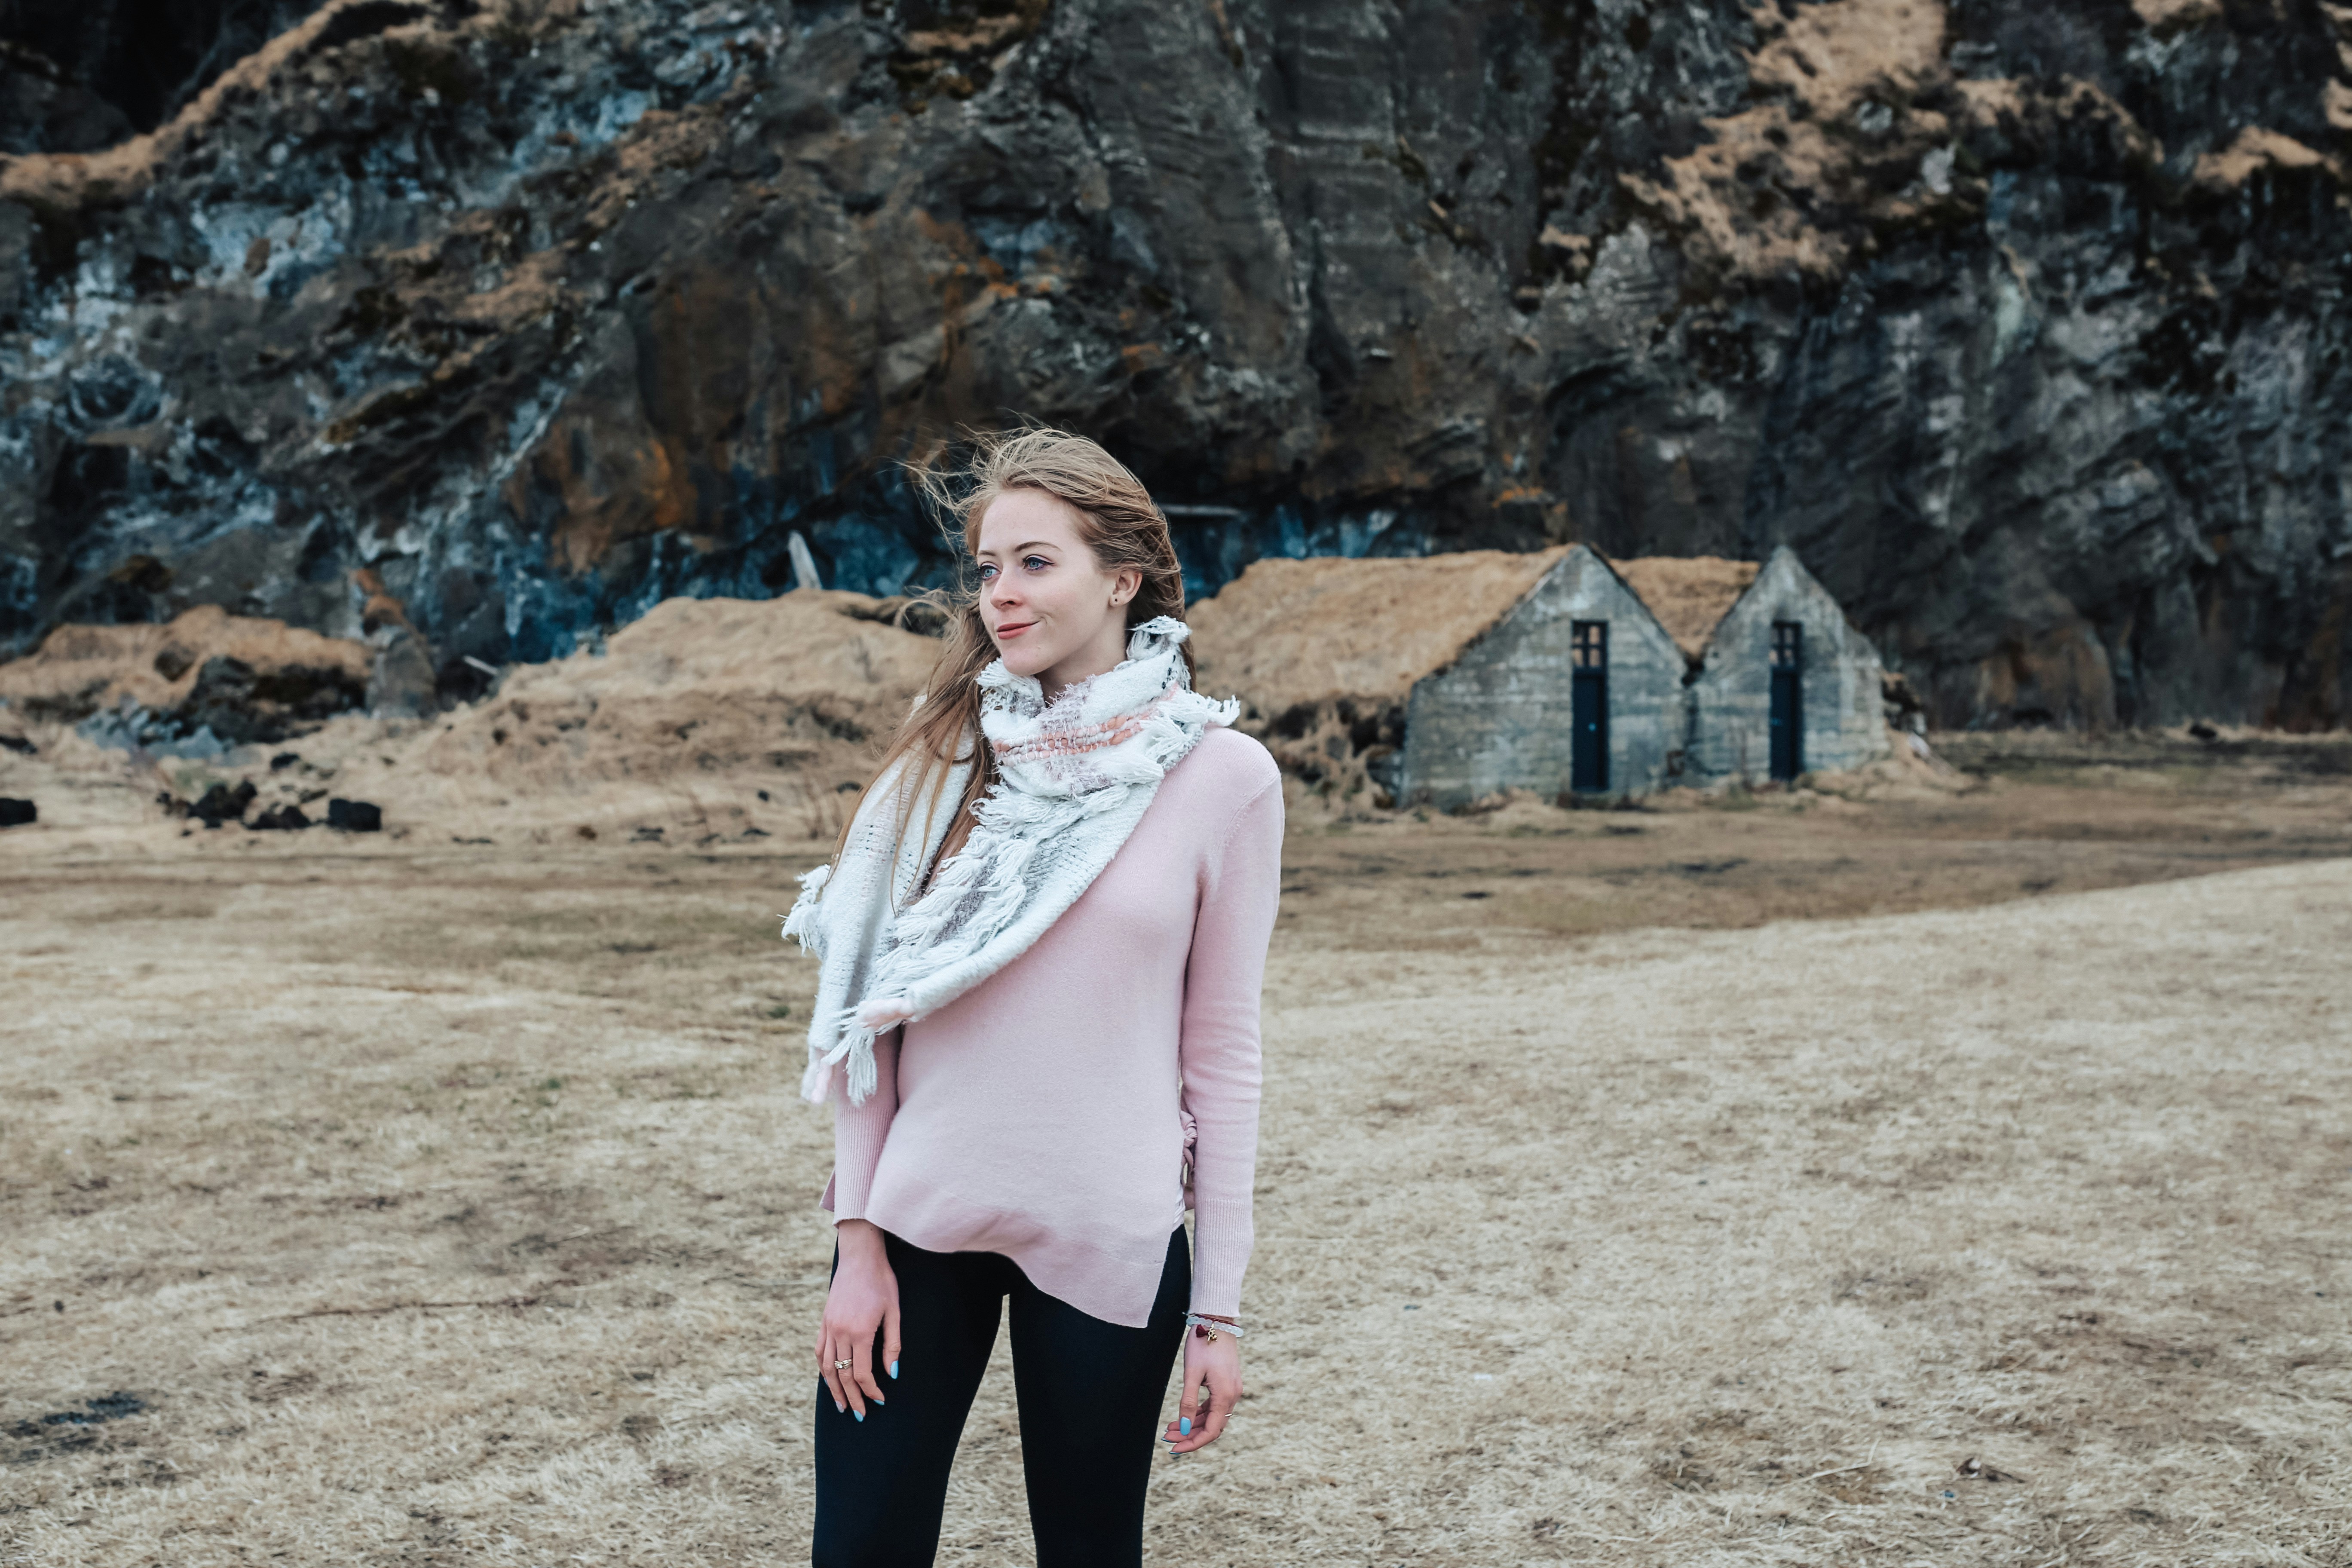 Wearing a Halogen Cashmere sweater in Iceland